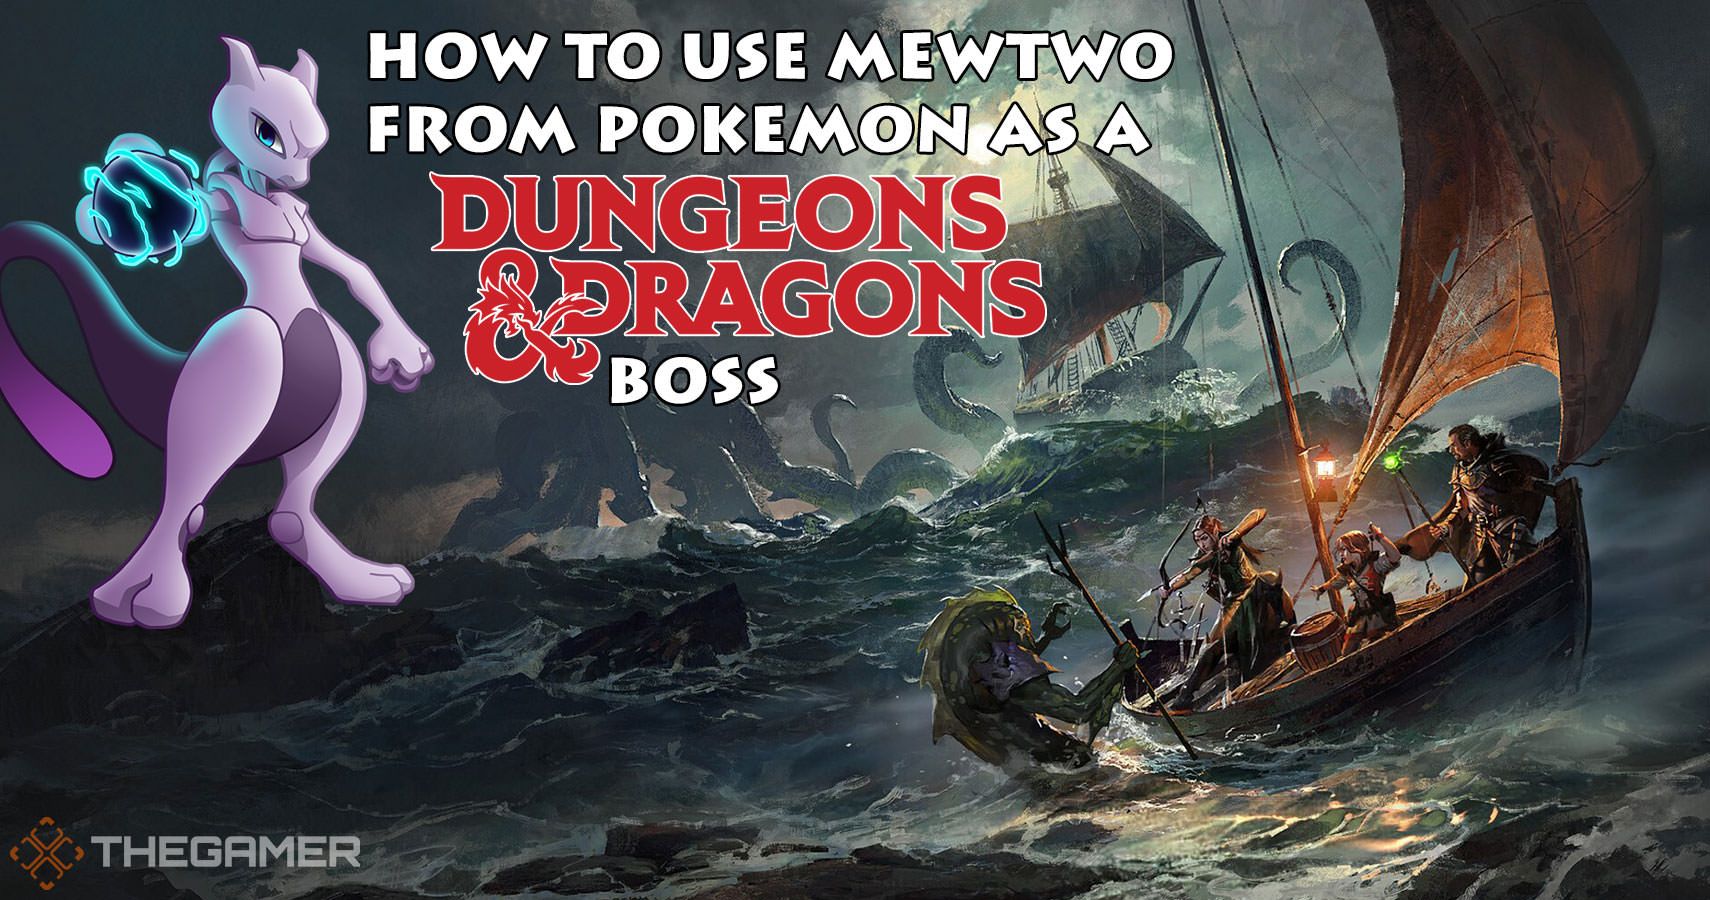 How To Use Pokémons Mewtwo As A Dungeons & Dragons Boss